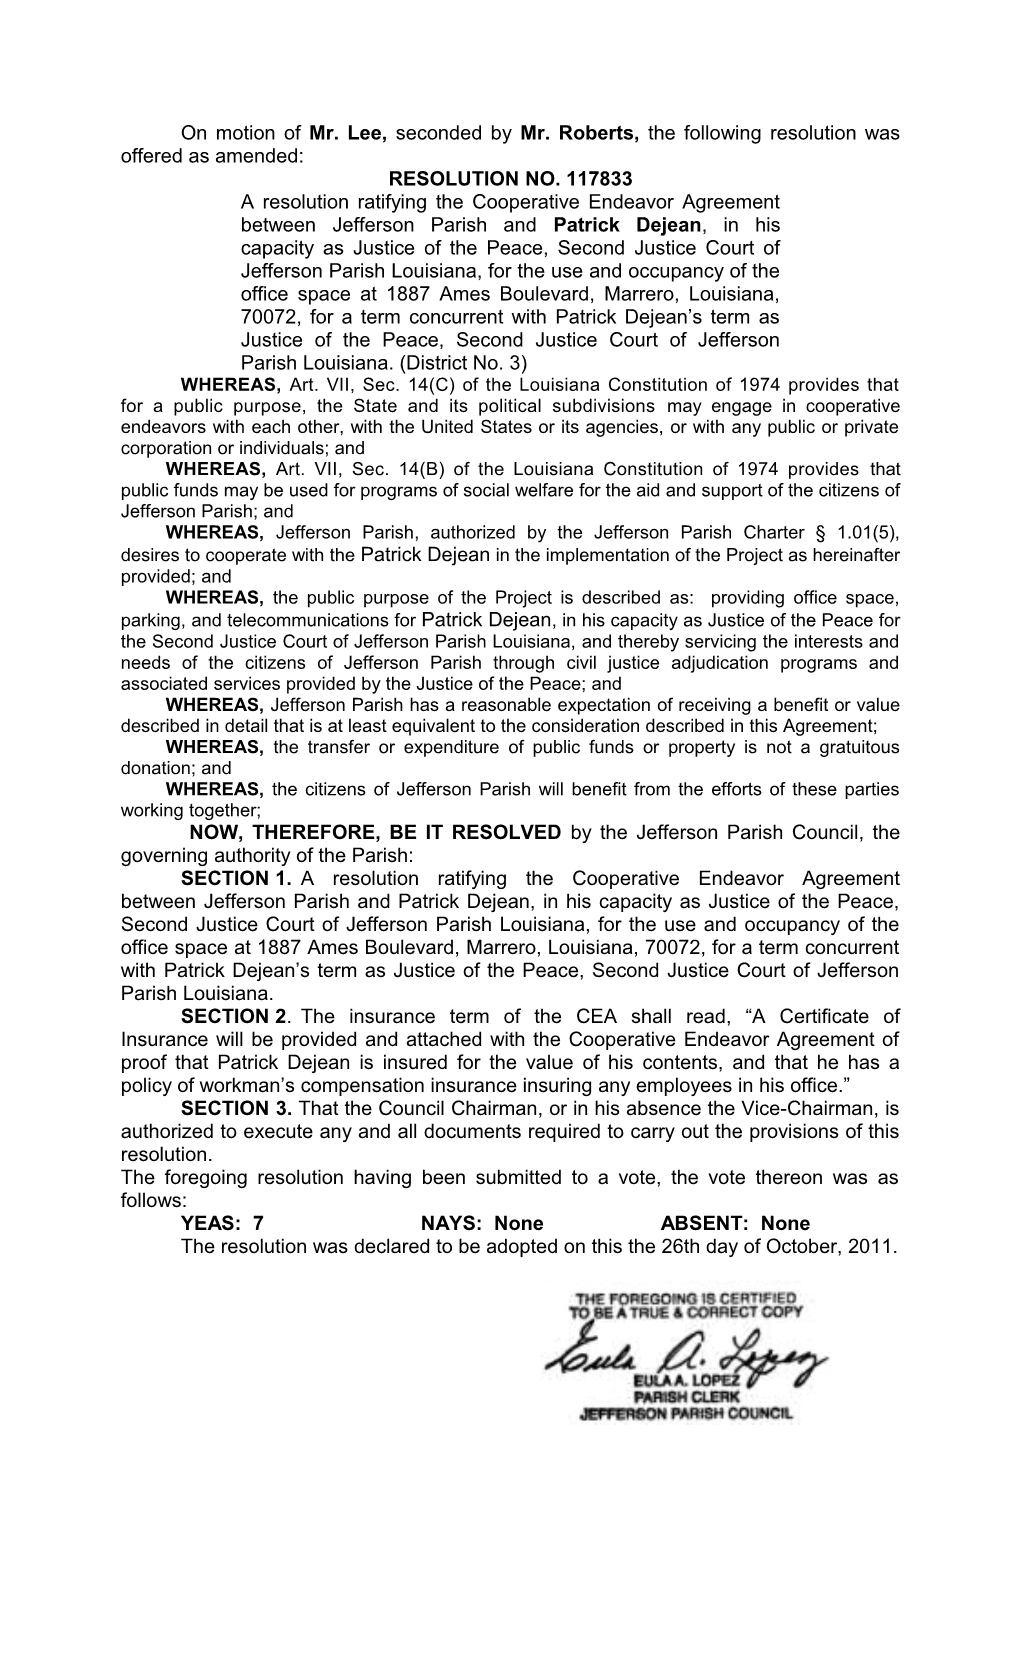 On Motion of Mr. Lee, Seconded by Mr. Roberts, the Following Resolution Was Offered As Amended